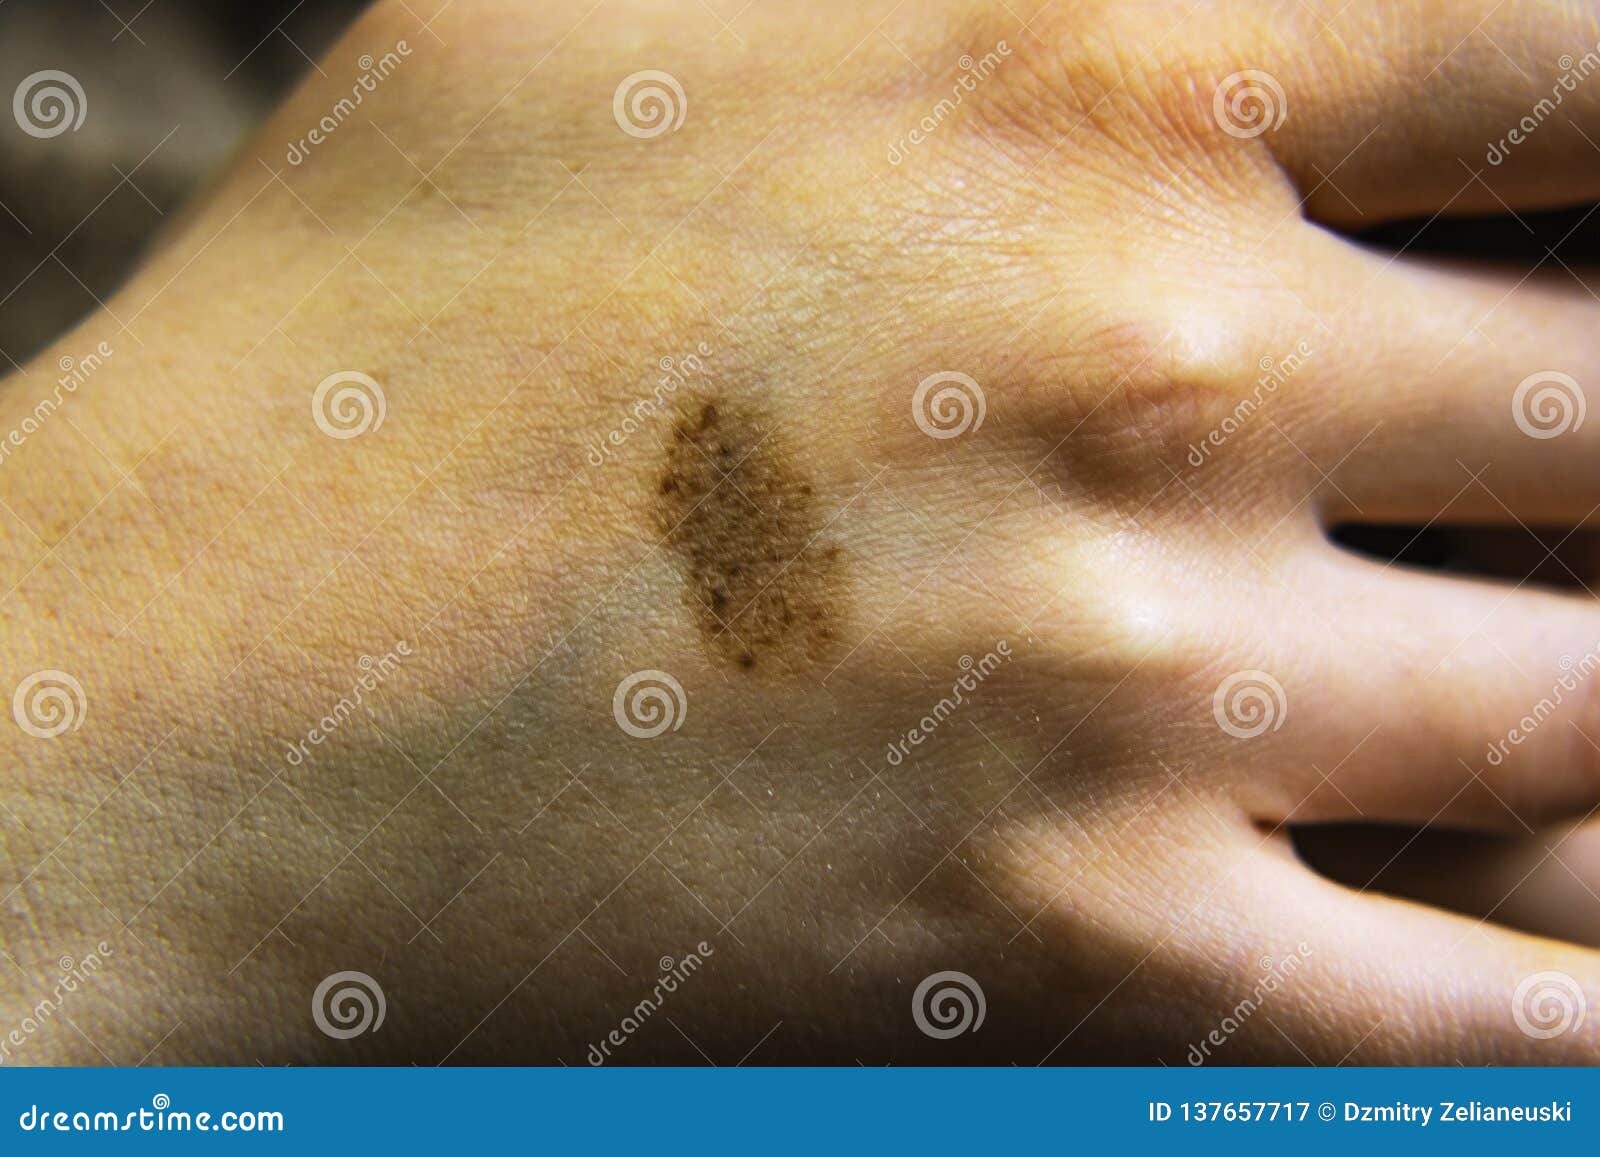 Birthmark Or Mole On The Skin Of The Hand Can Be Used For The Concept